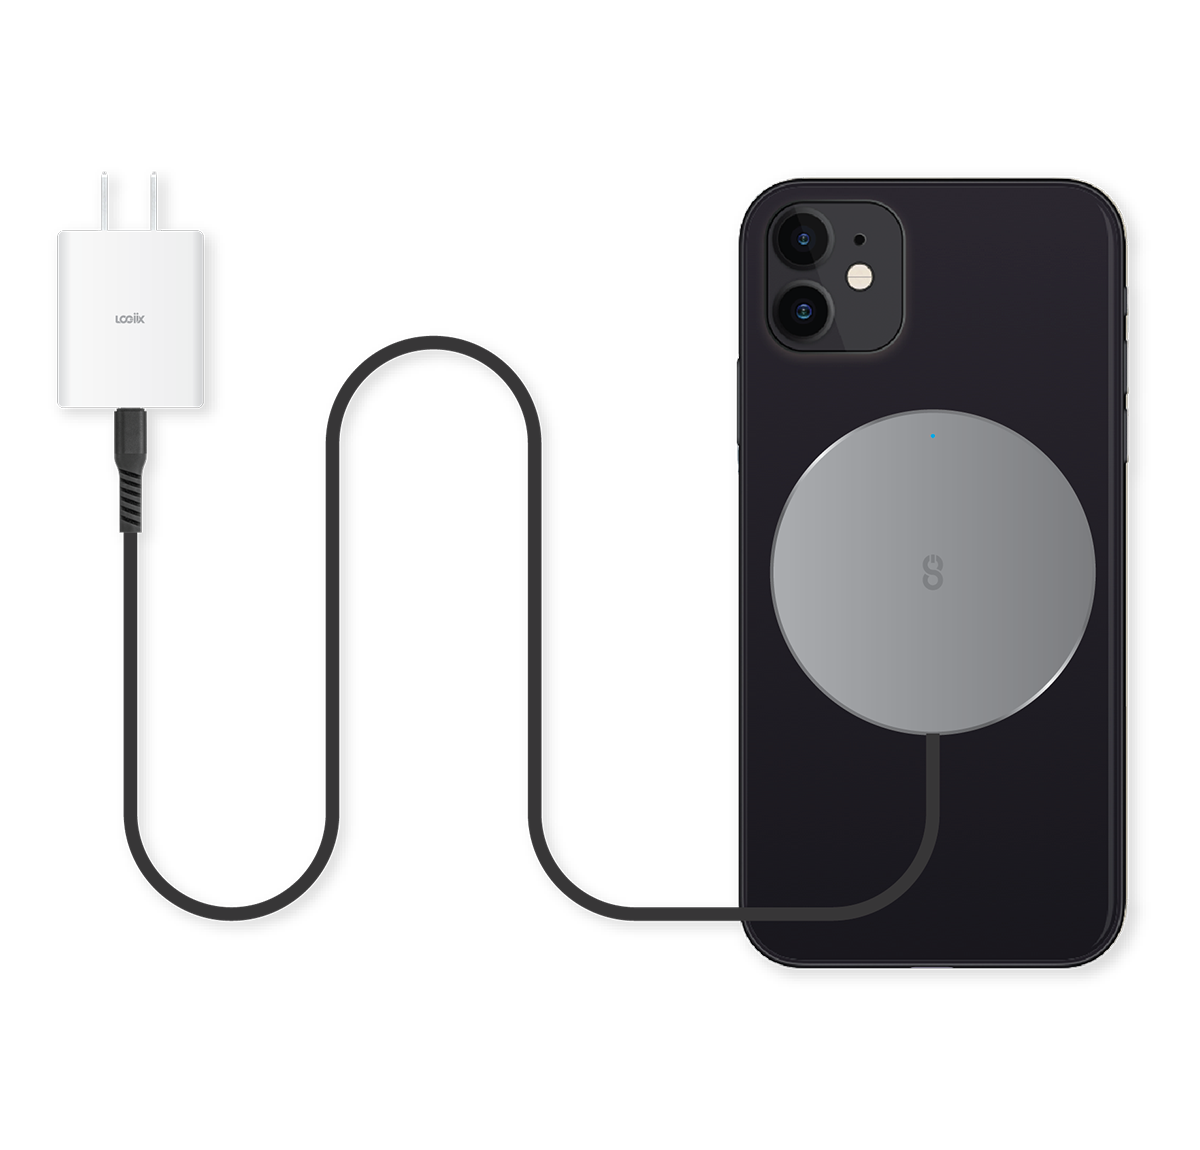 Graphite grey MagSafe compatible fast-charging magnetic charger with built-in 1.5m USB-C cable charging a black iPhone 12 